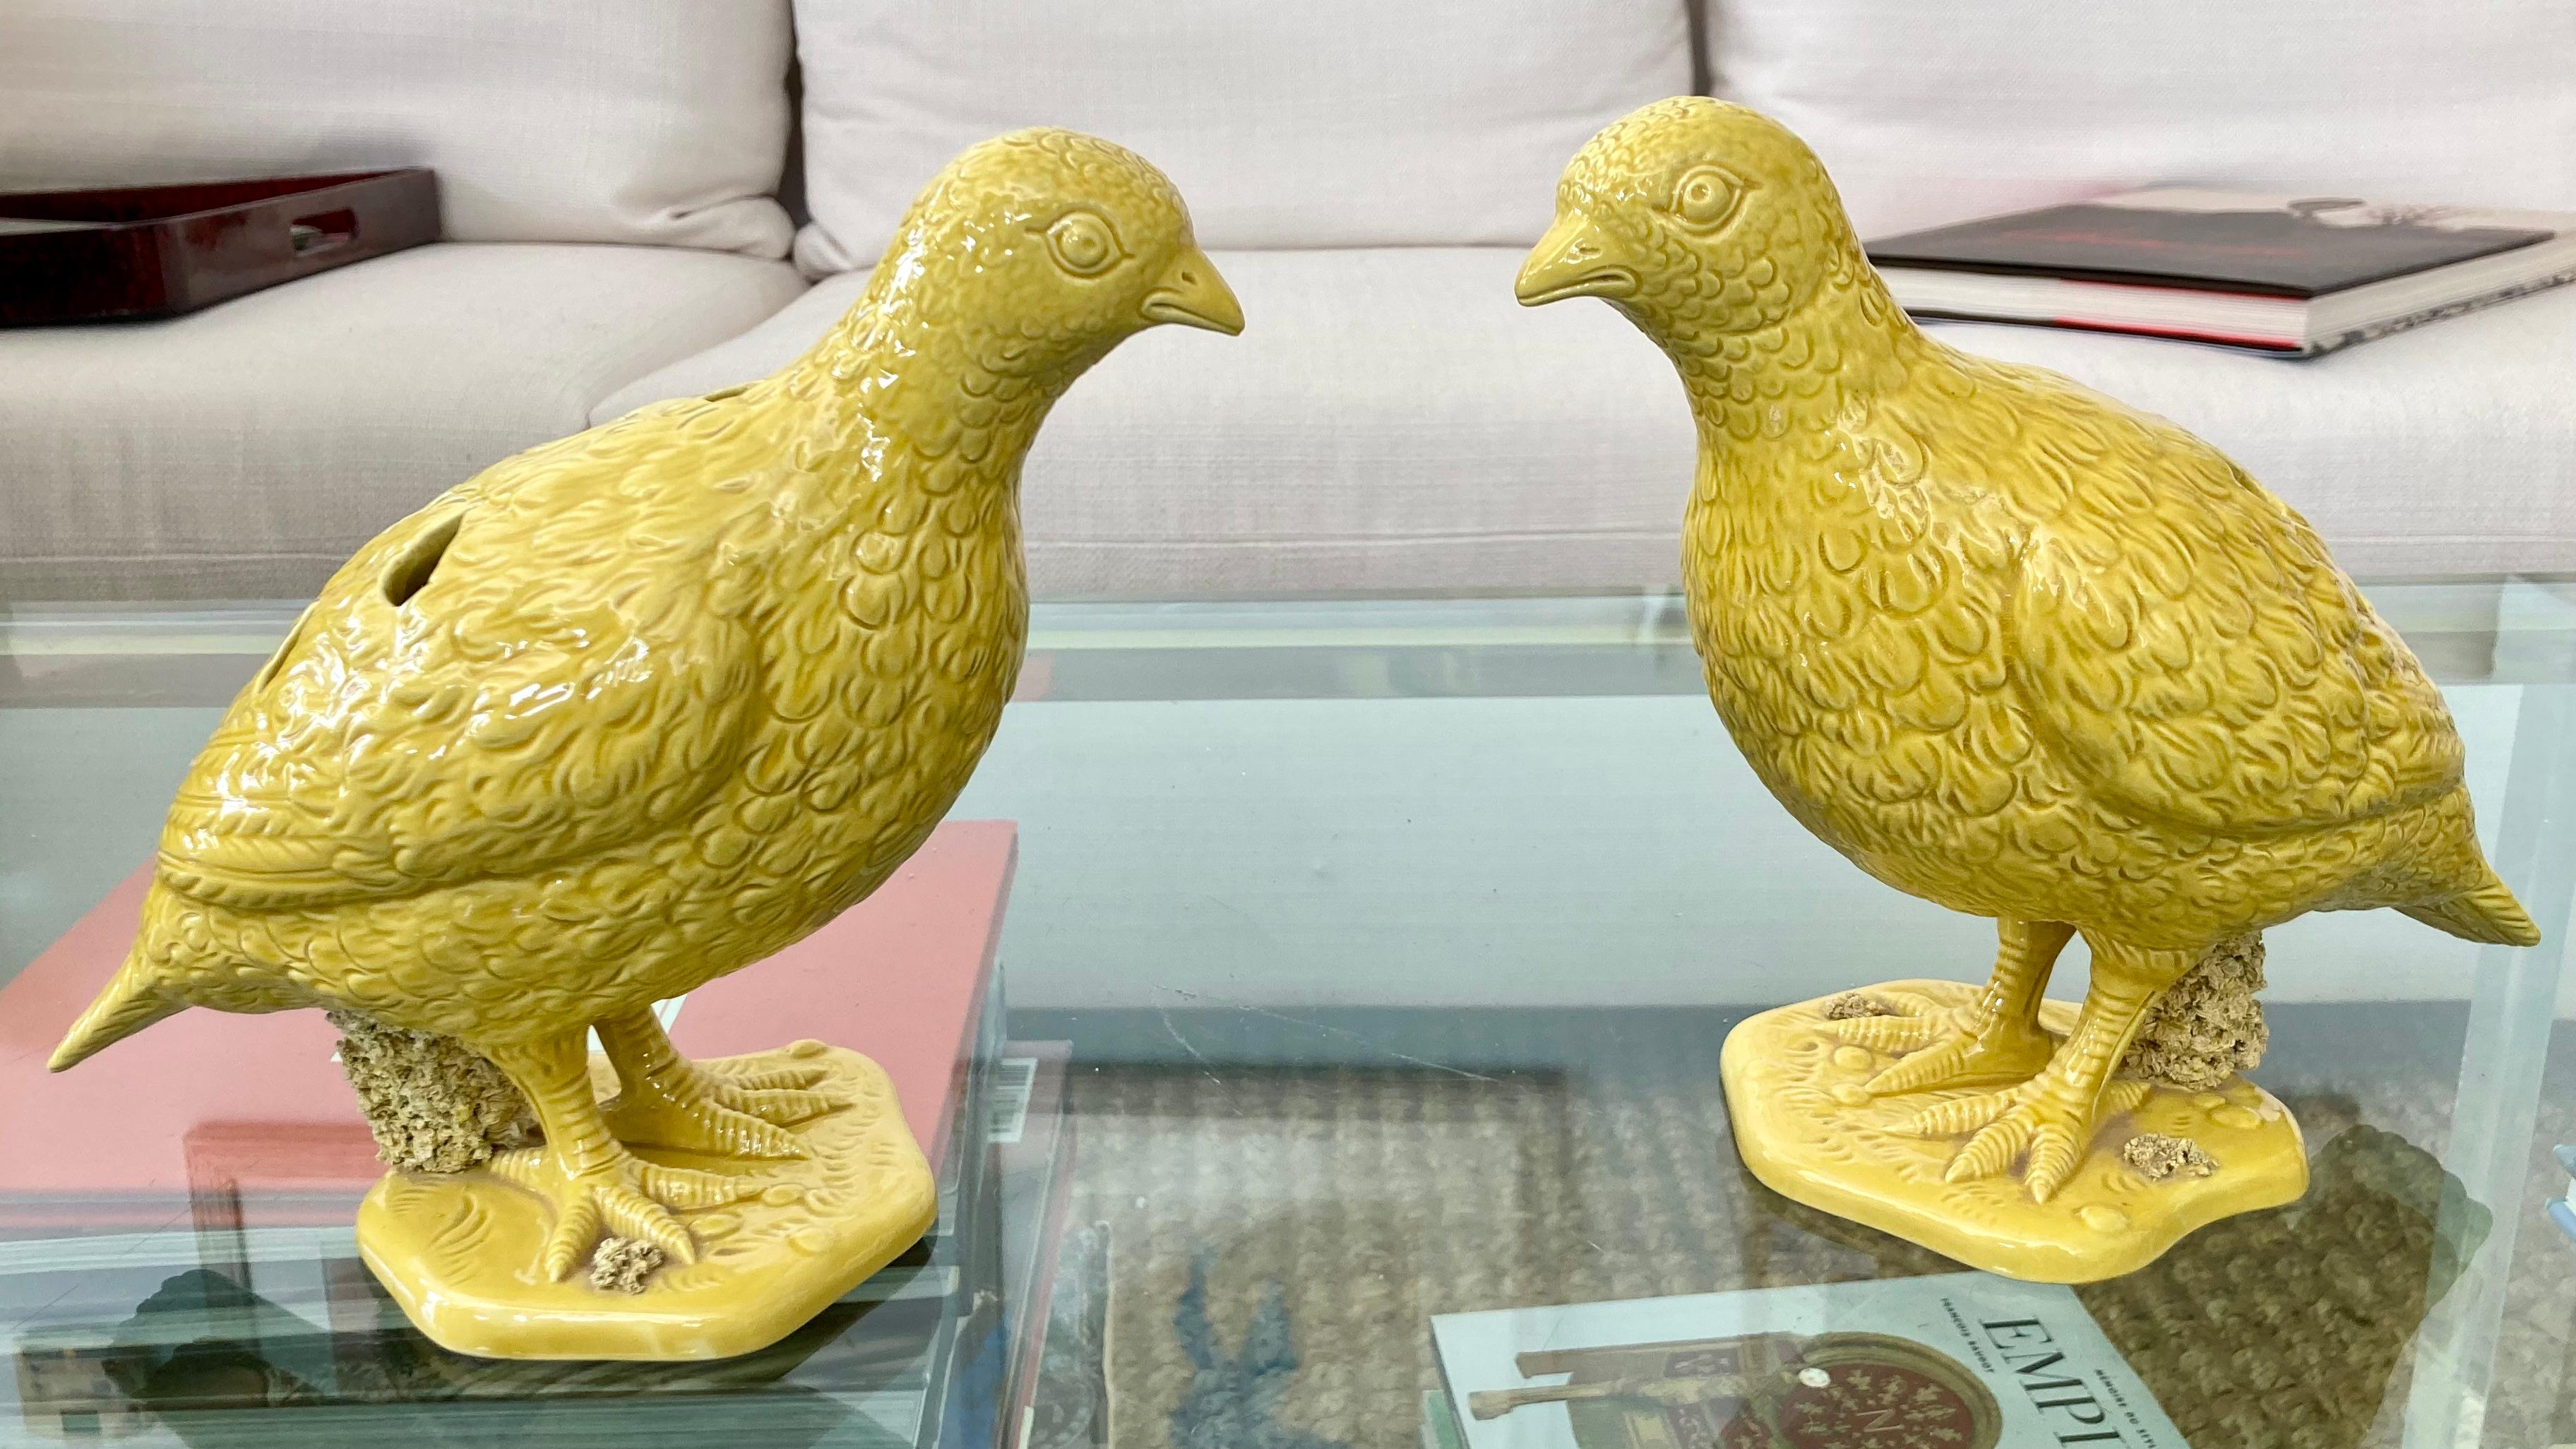 Beautiful pair of Asian birds flower frogs for arrangements. Gorgeous pair for your Asian and Boho Chic inspired interiors and table tops.